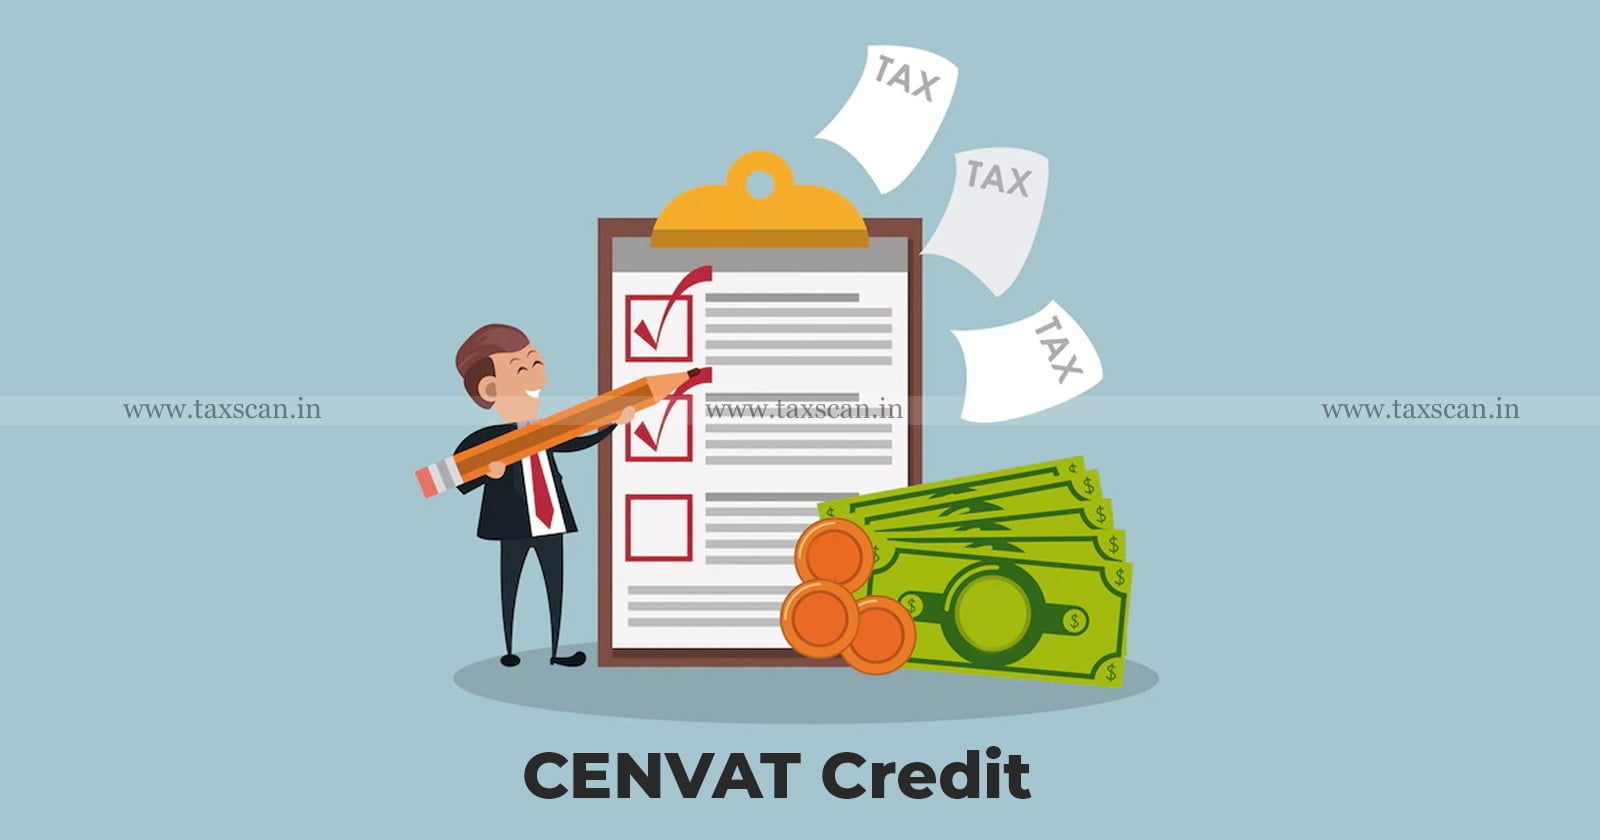 CESTAT - CESTAT Ahmedabad - Cenvat Credit - Place of removal tax - taxscan